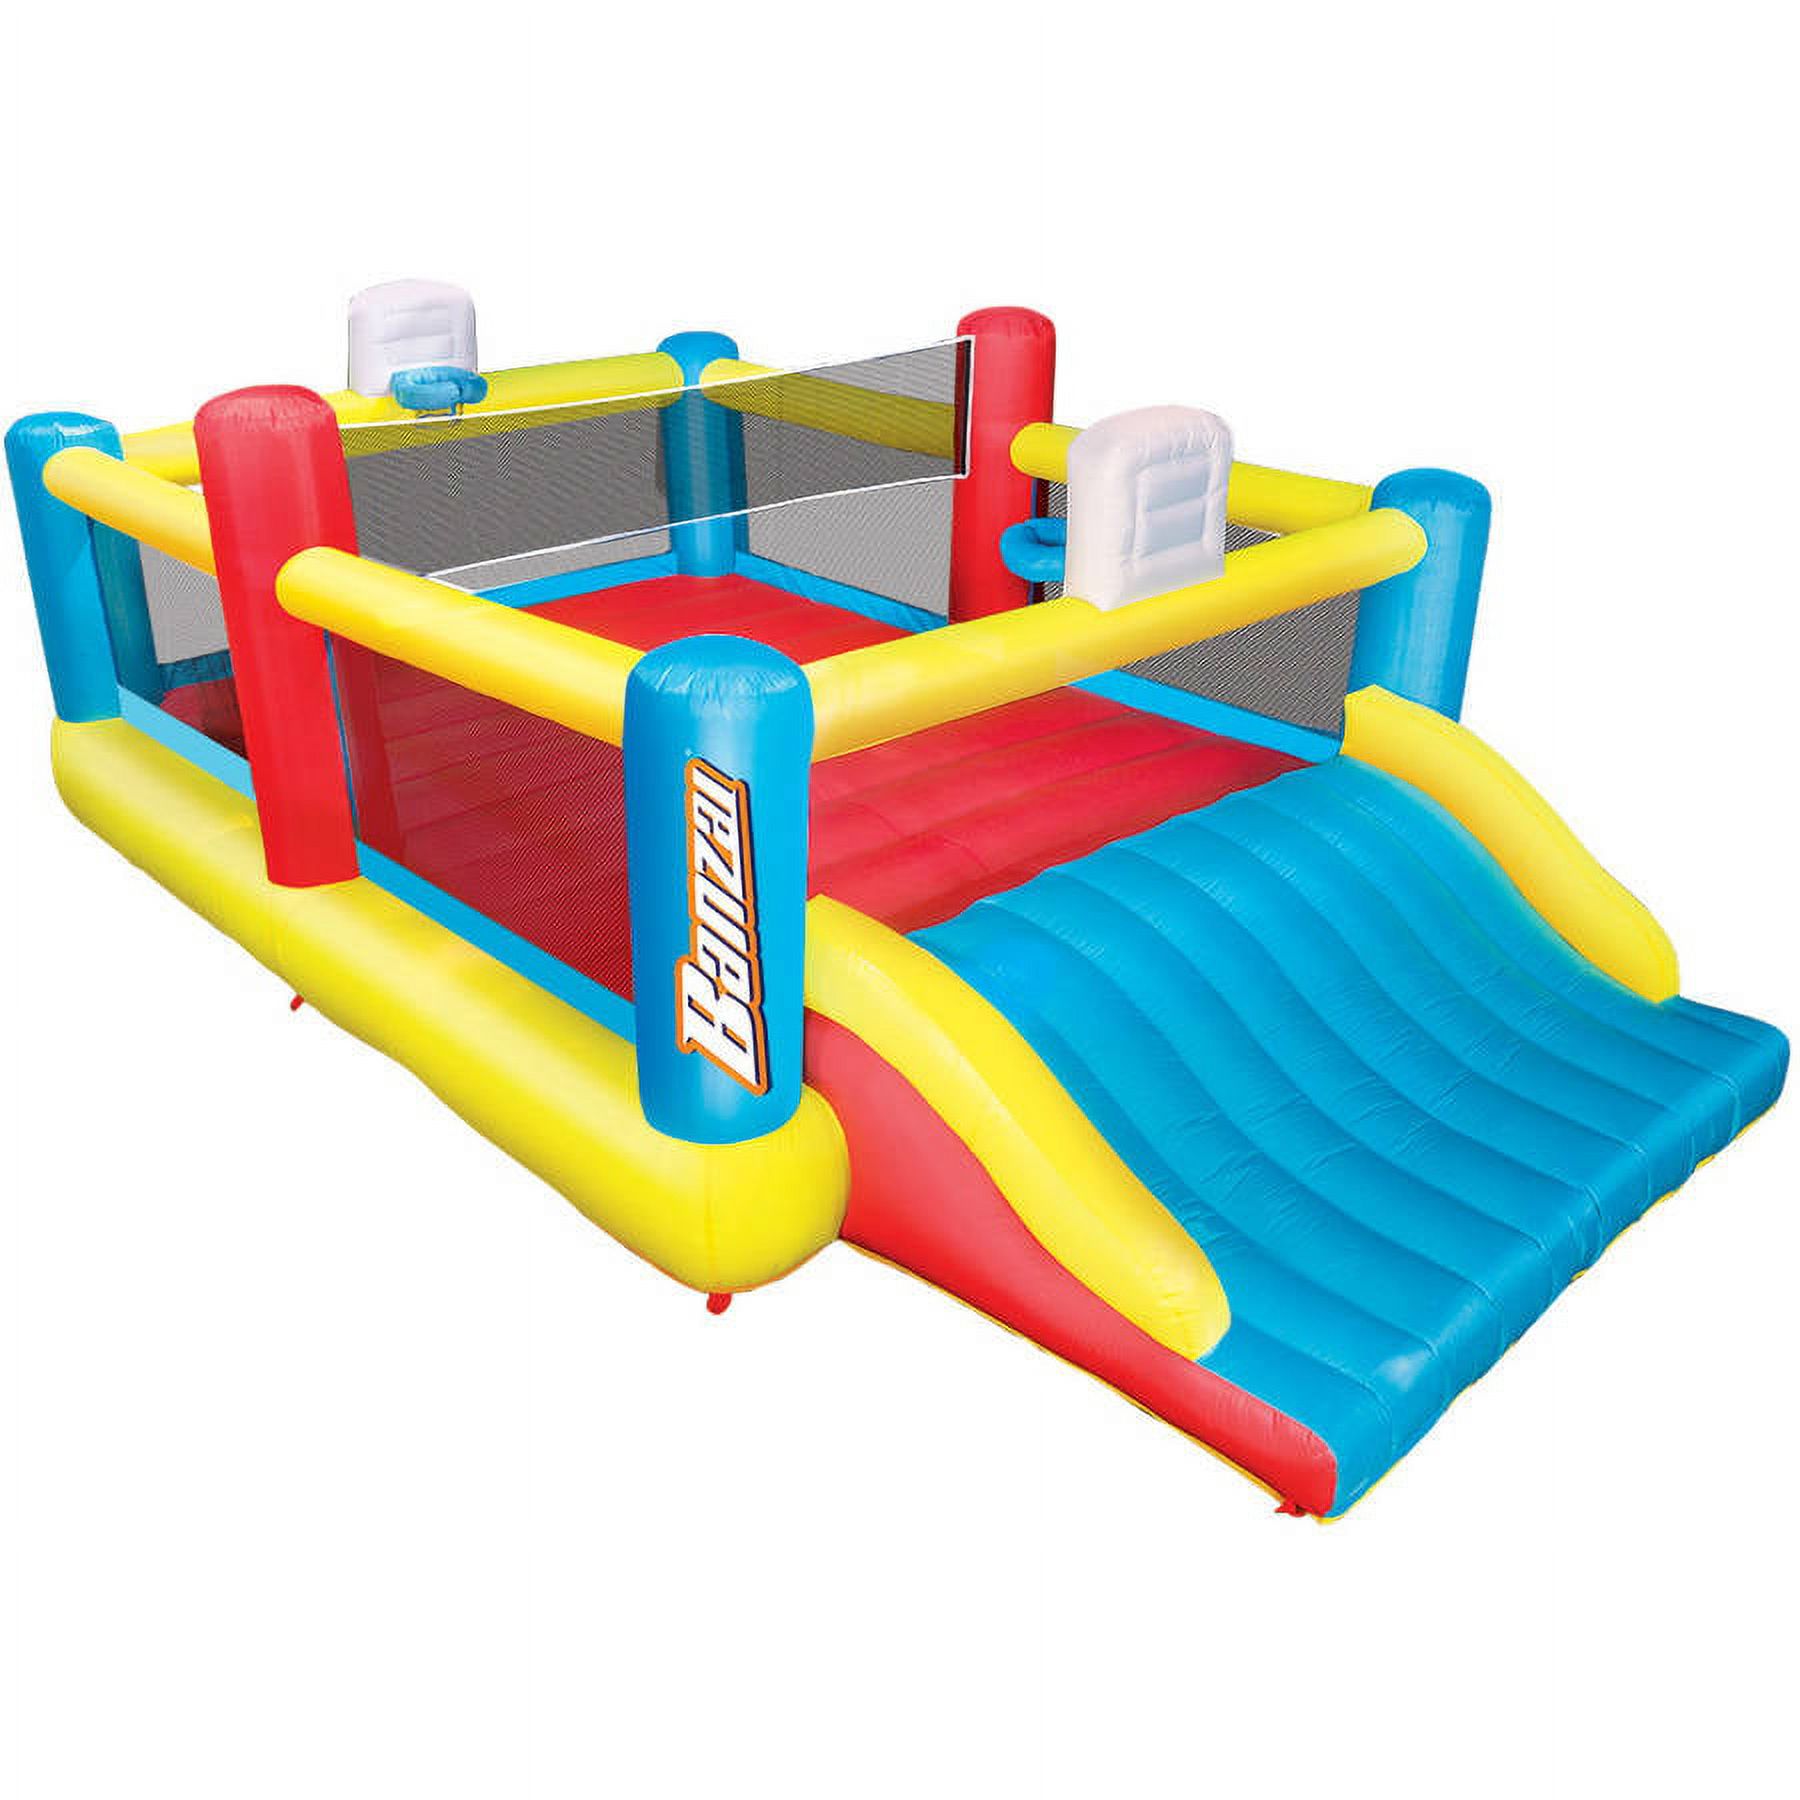 Sports Zone Bounce Arena - image 1 of 7